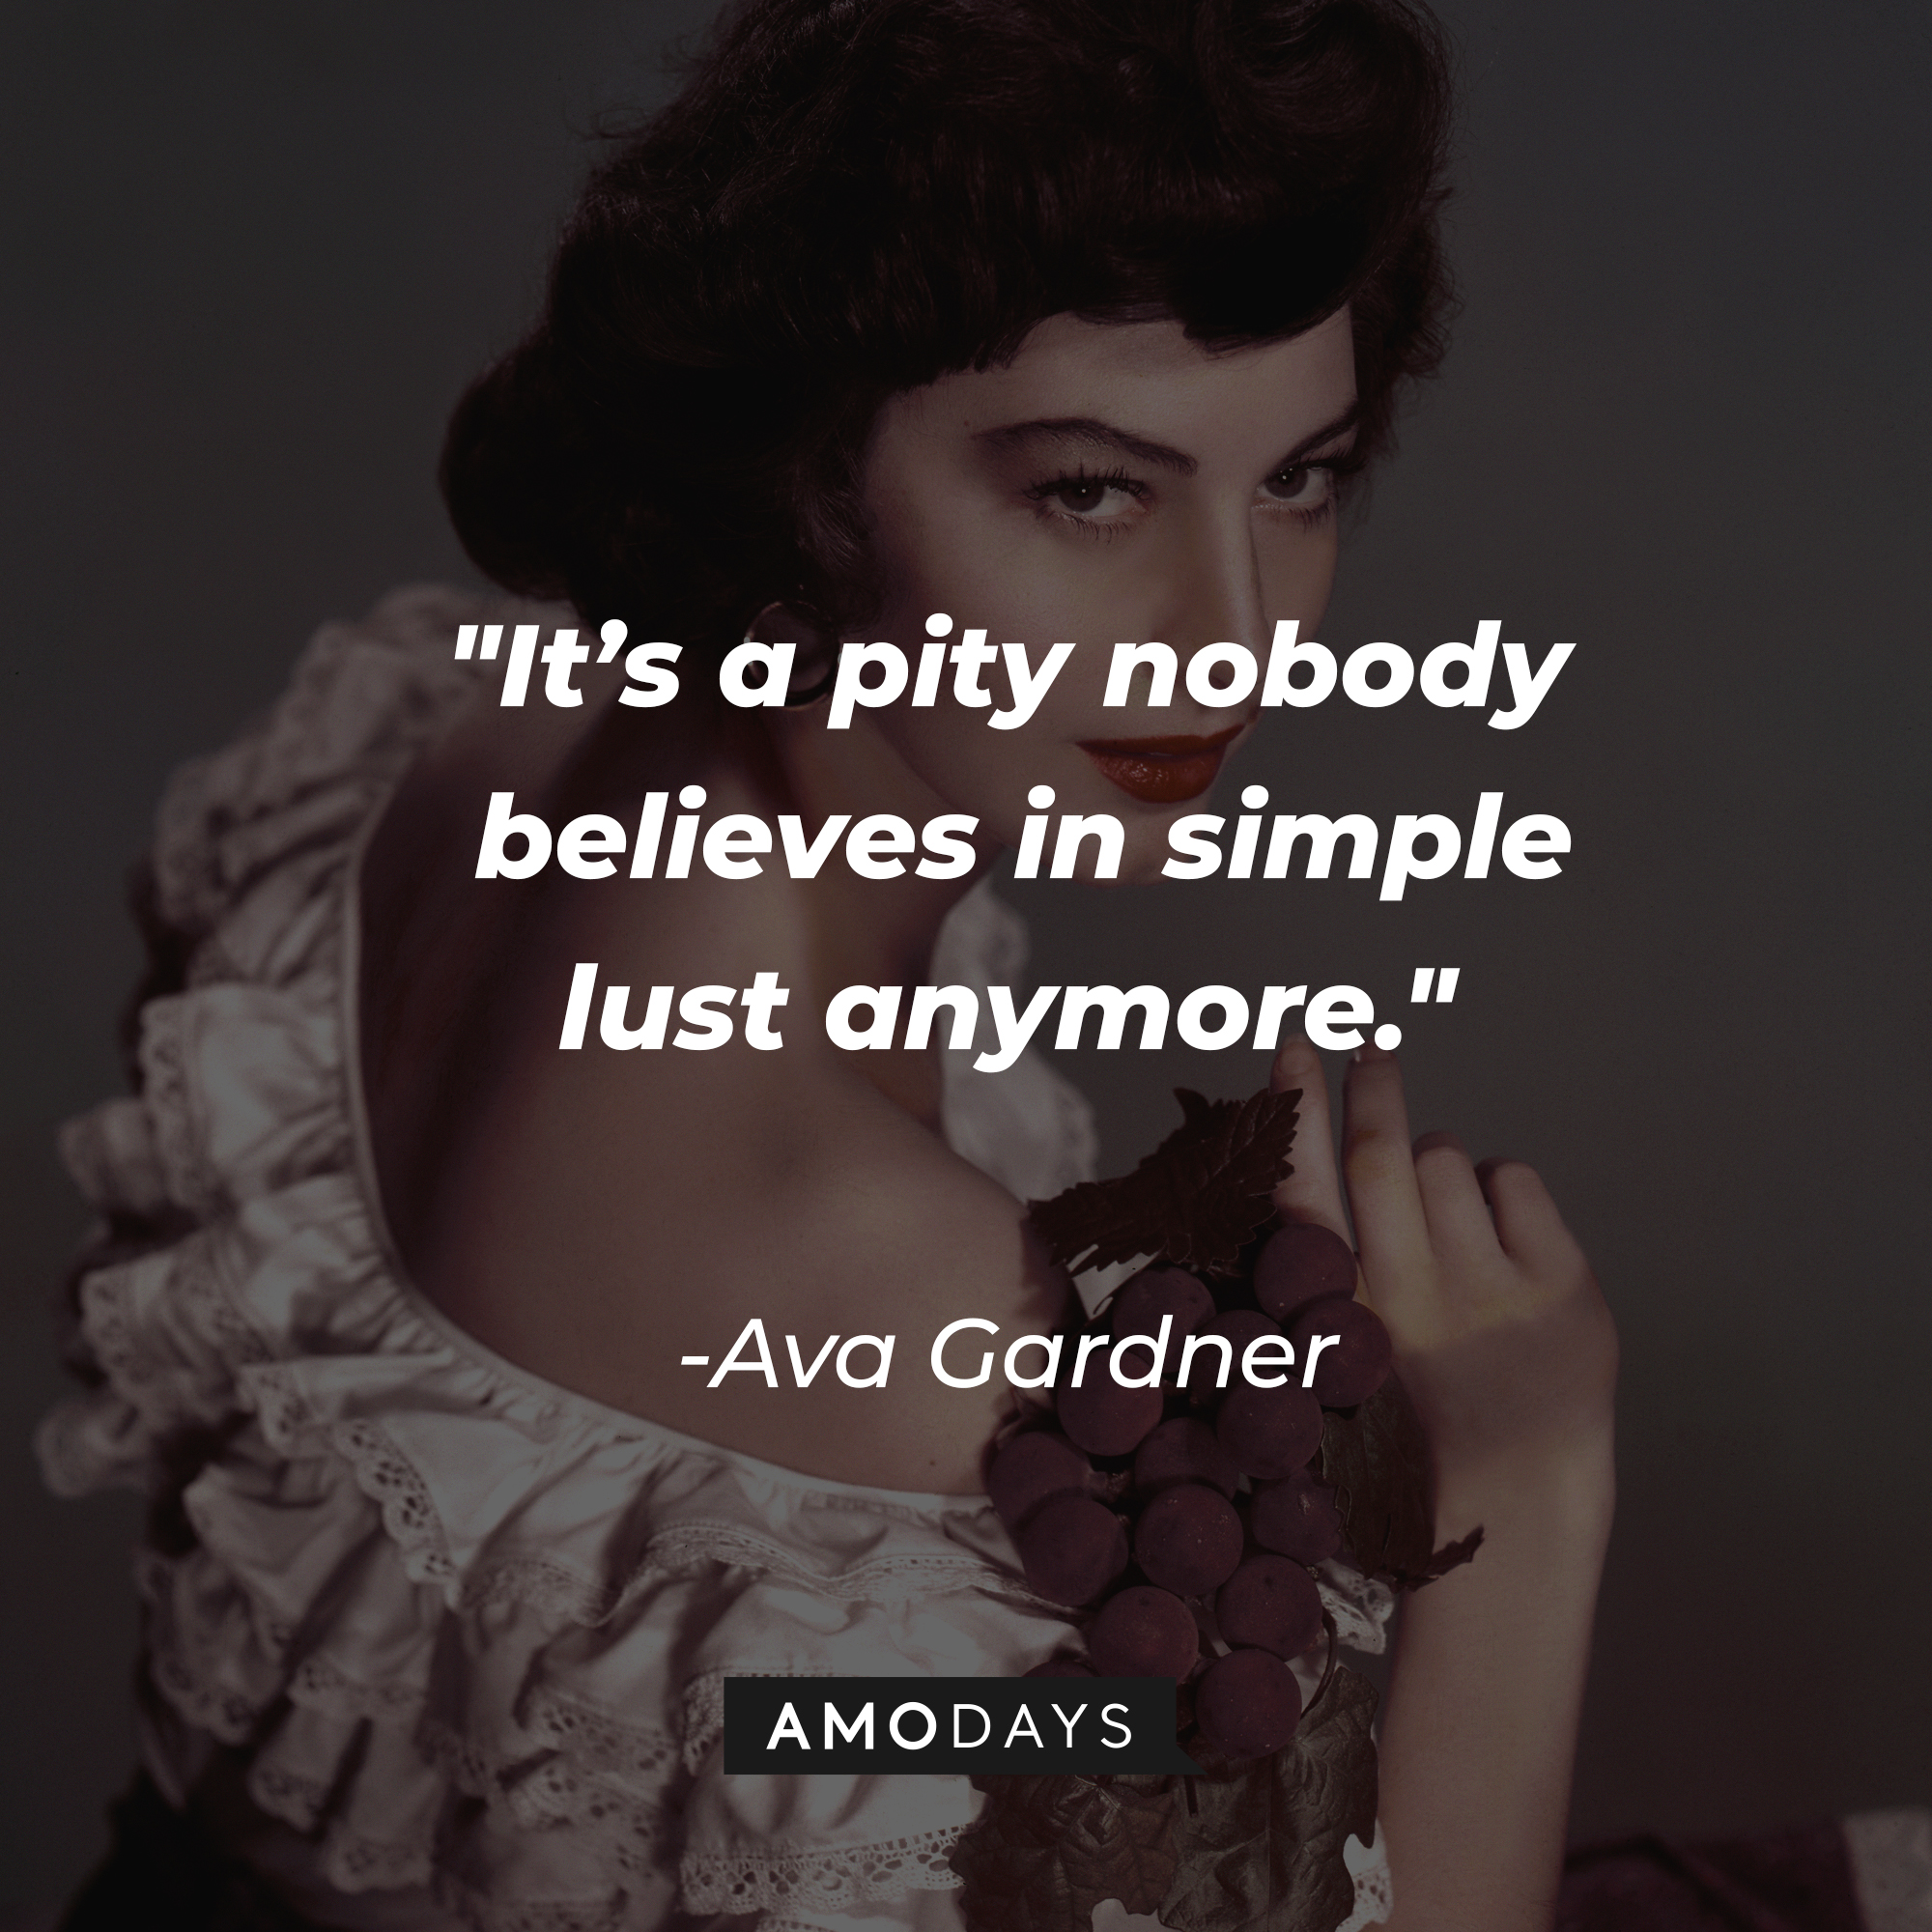 Ava Gardner with her quote: “It’s a pity nobody believes in simple lust anymore.” | Source: Getty Images